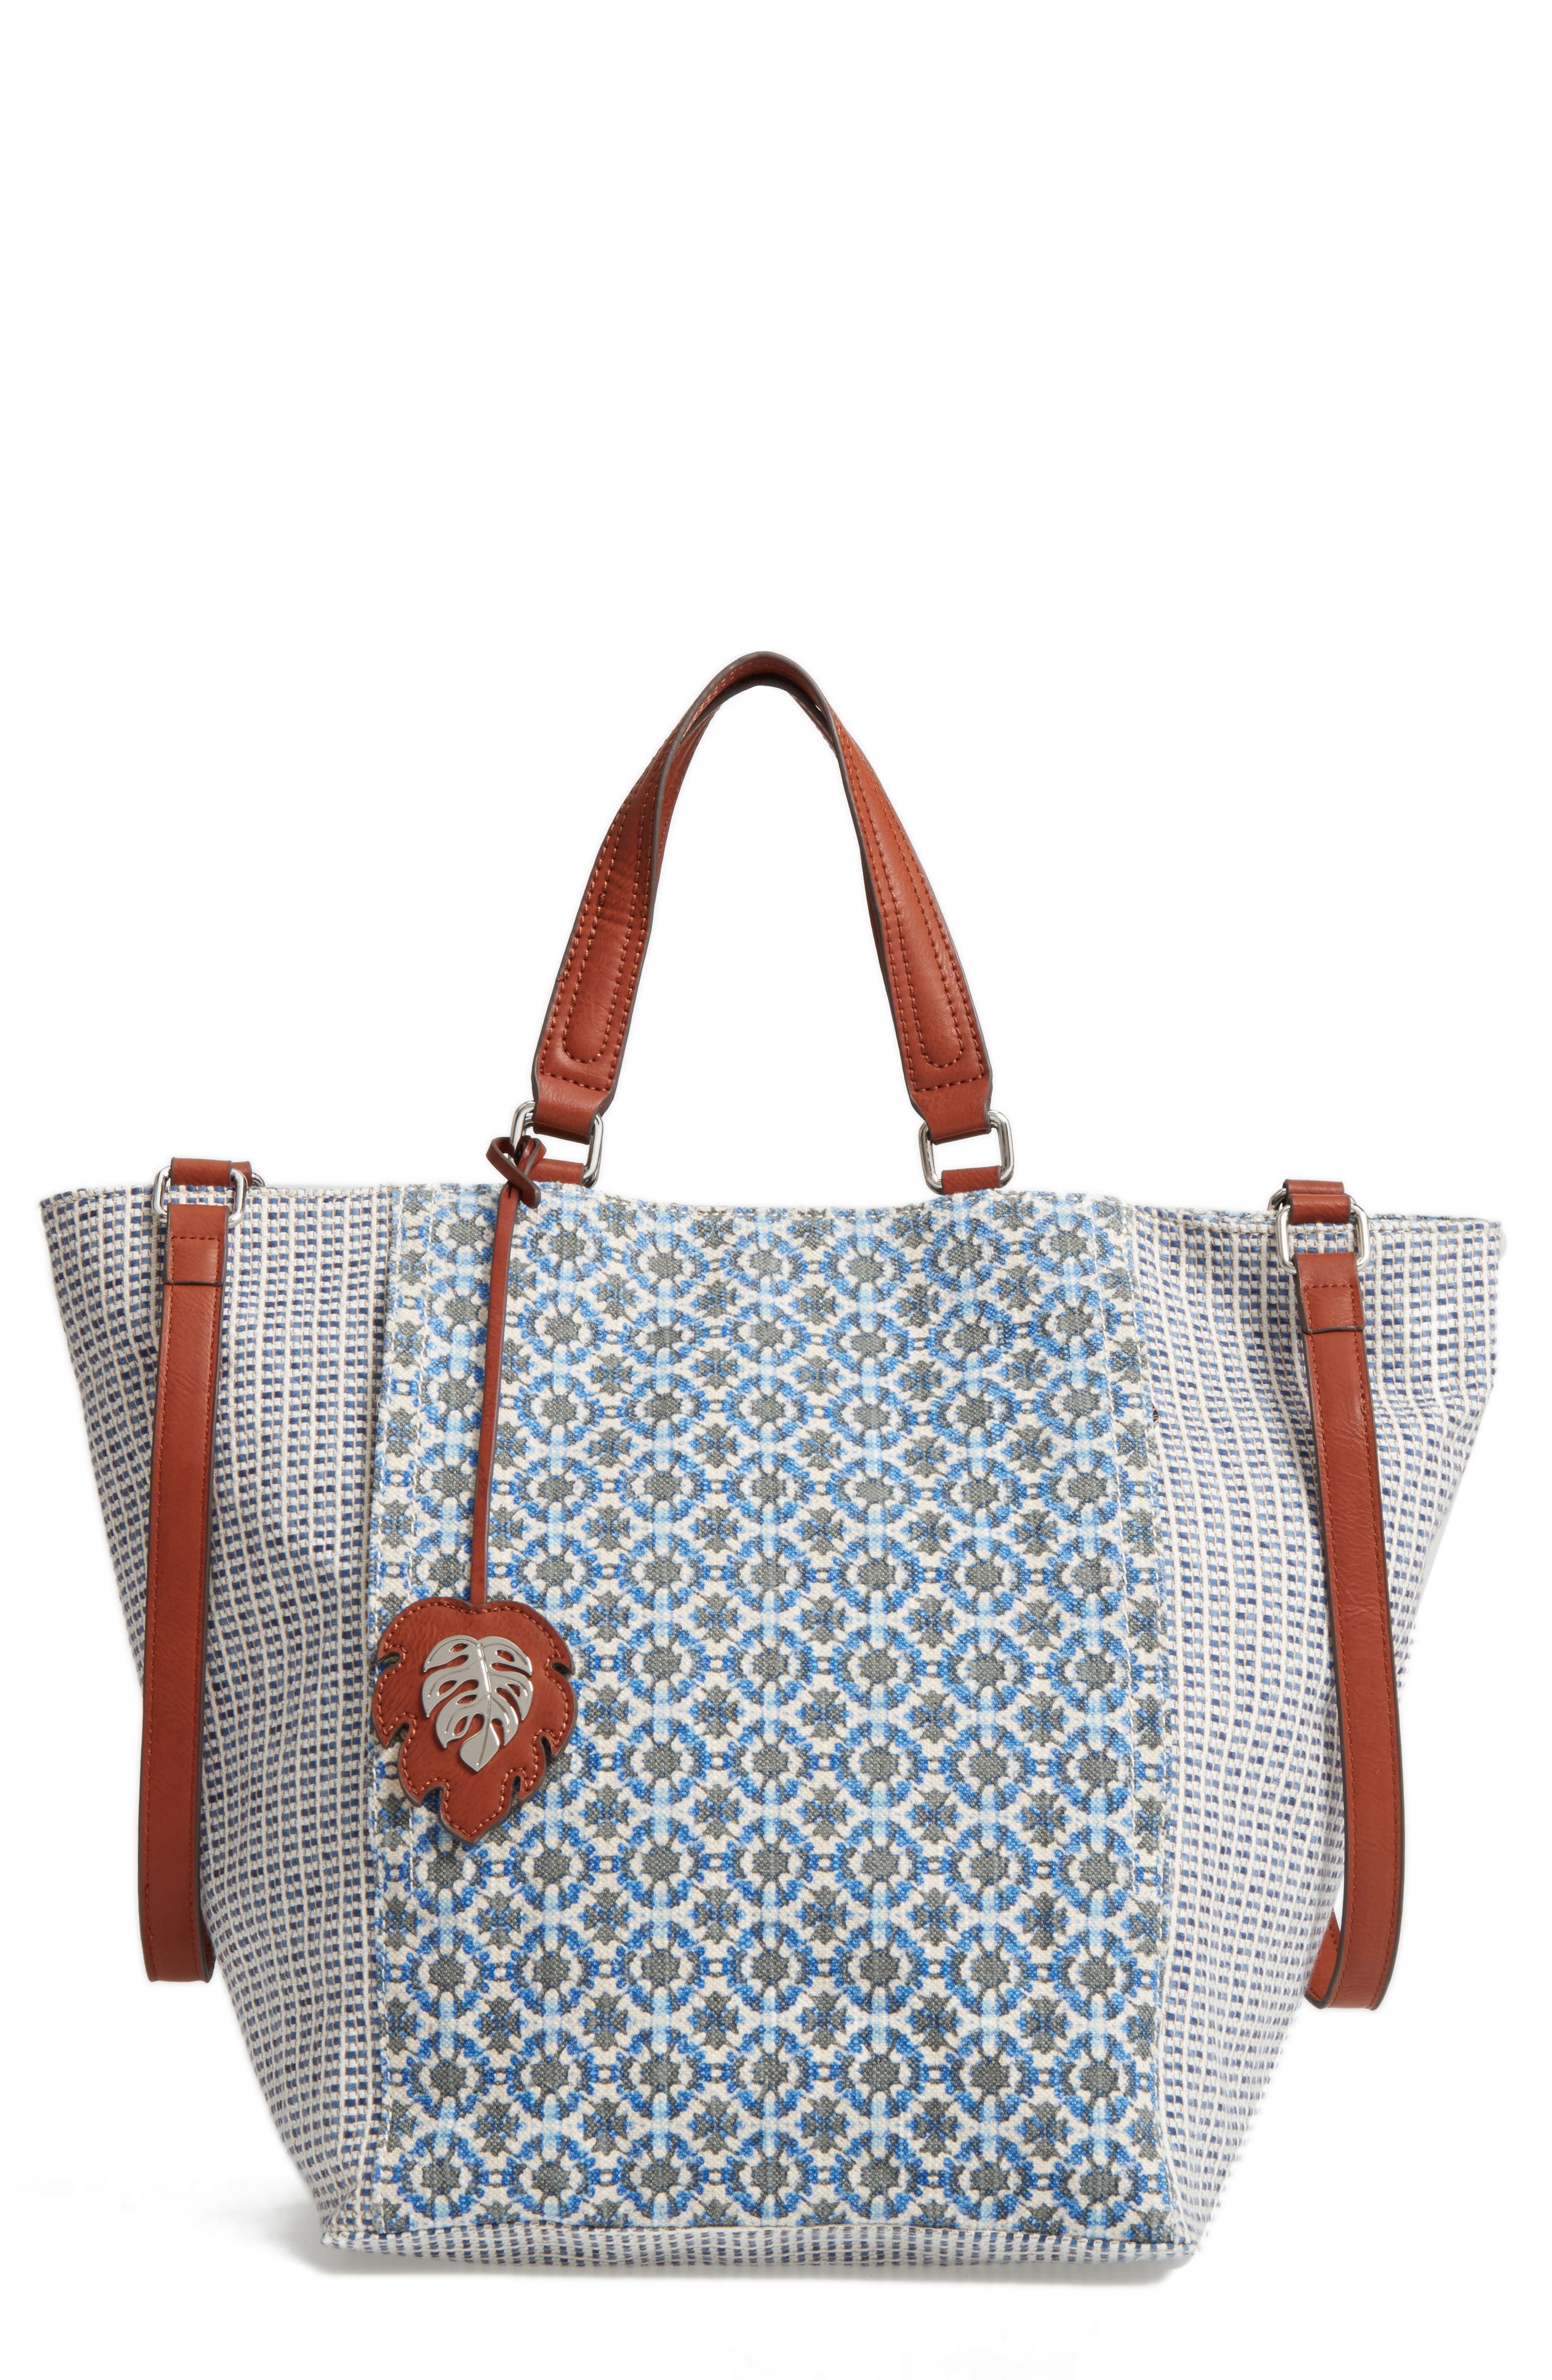 tommy bahama reef convertible tote